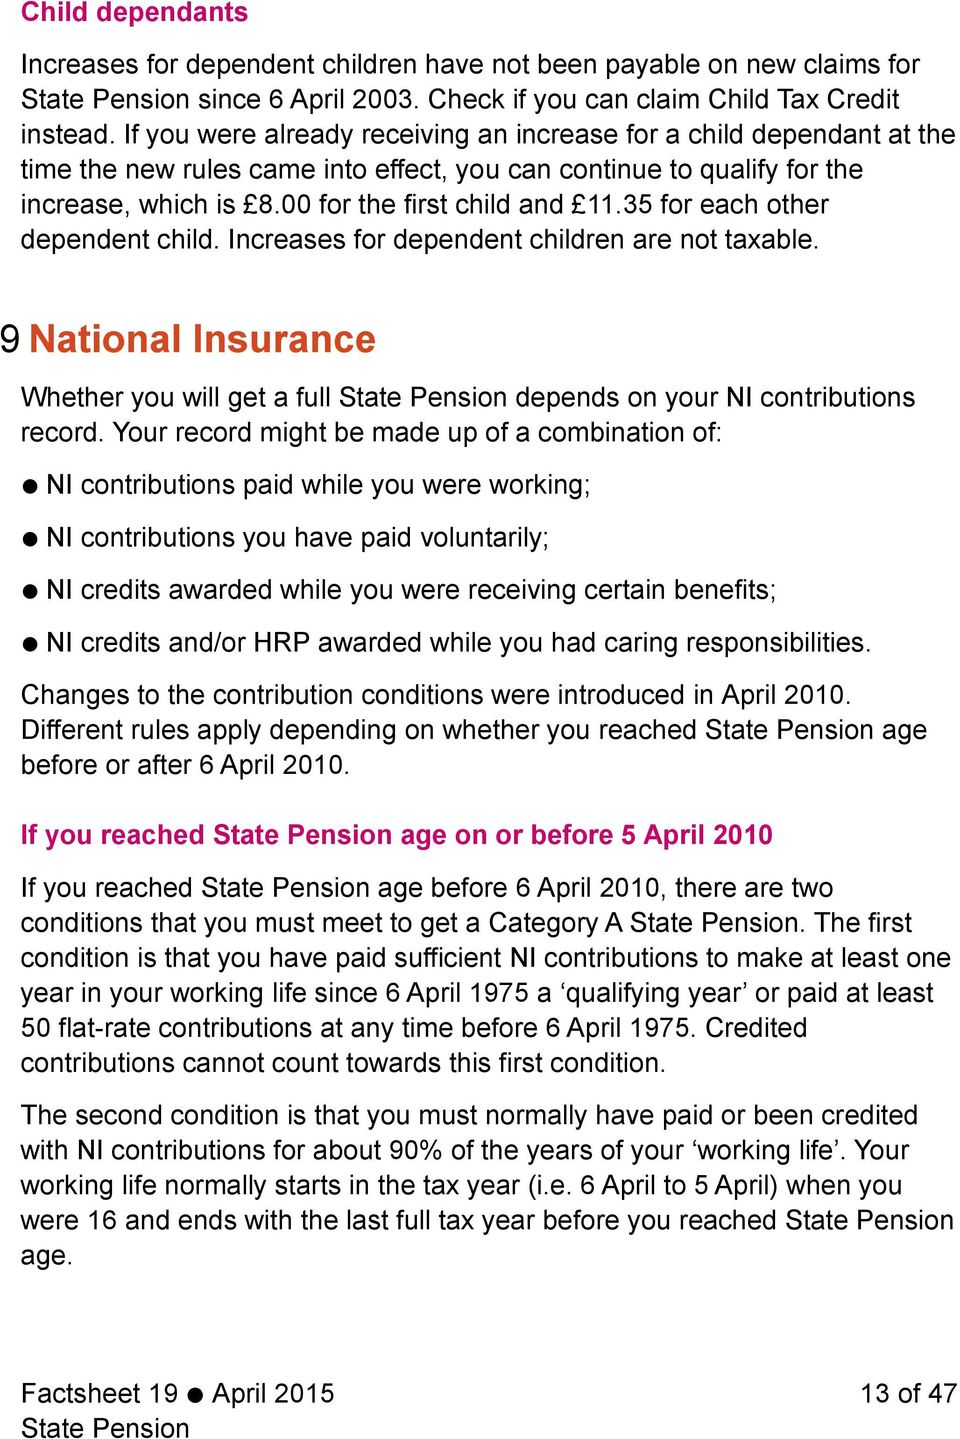 35 for each other dependent child. Increases for dependent children are not taxable. 9 National Insurance Whether you will get a full depends on your NI contributions record.